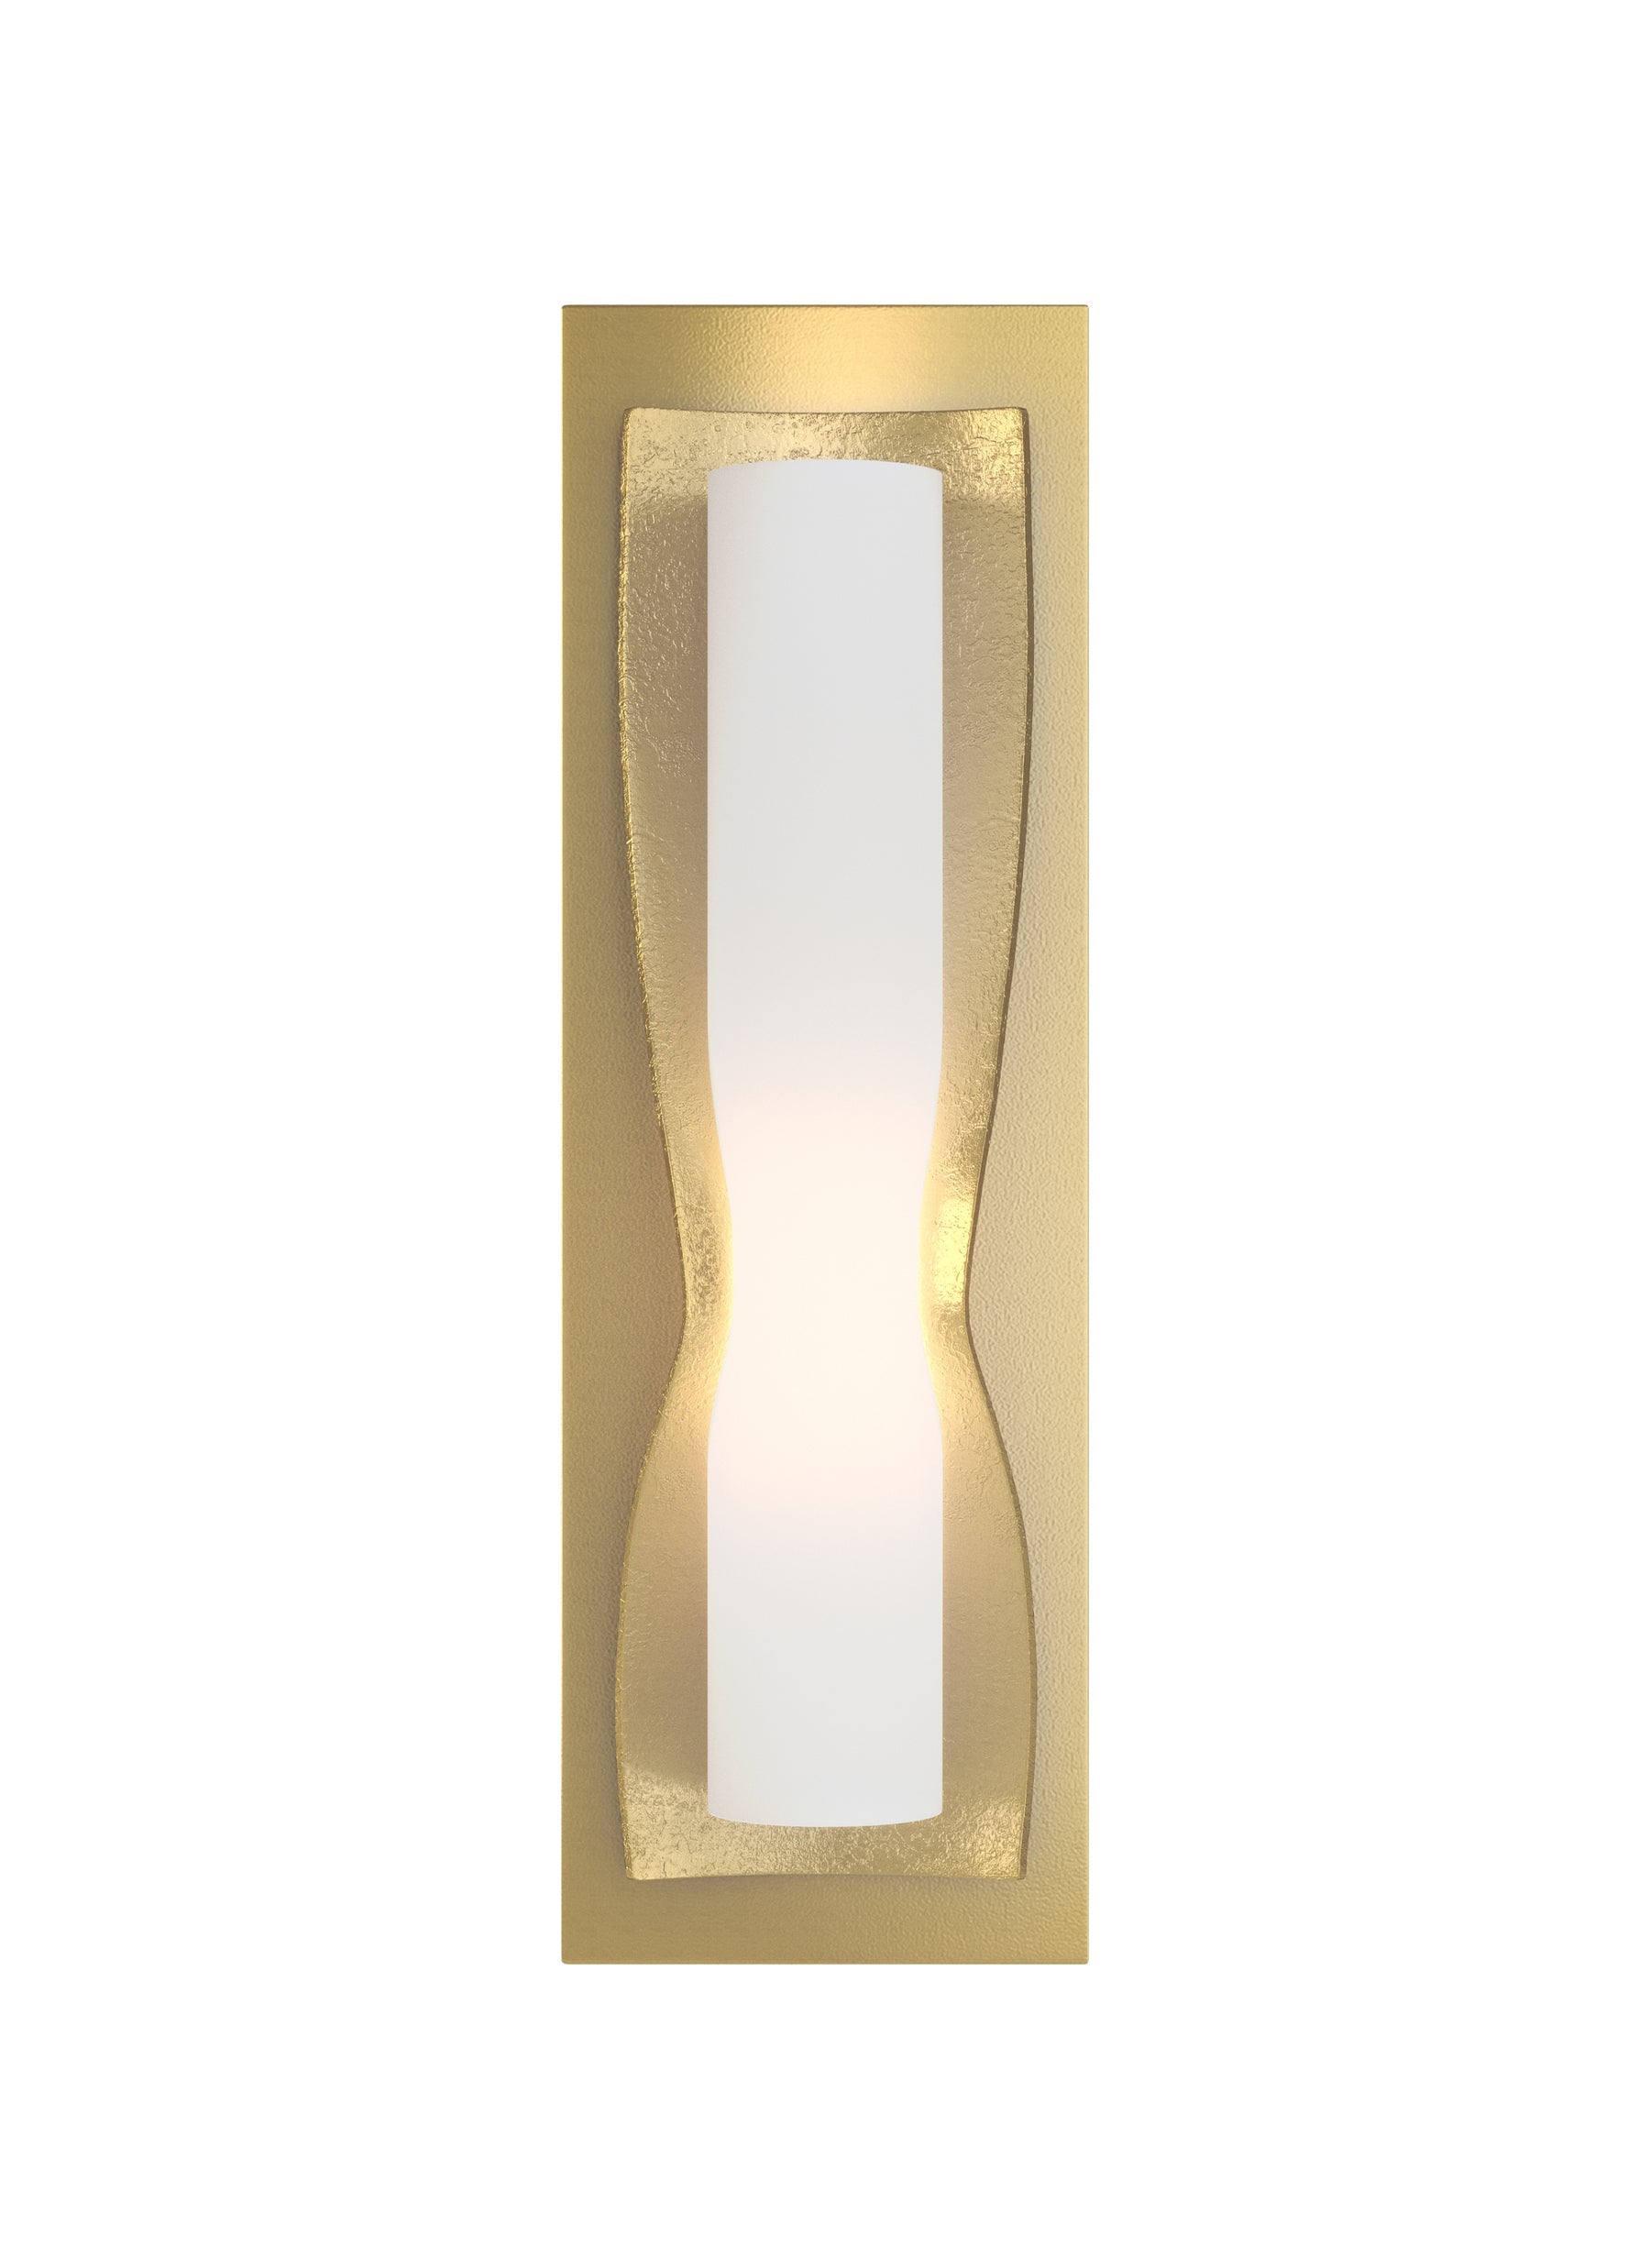 Dune 1L wall sconce - 204790